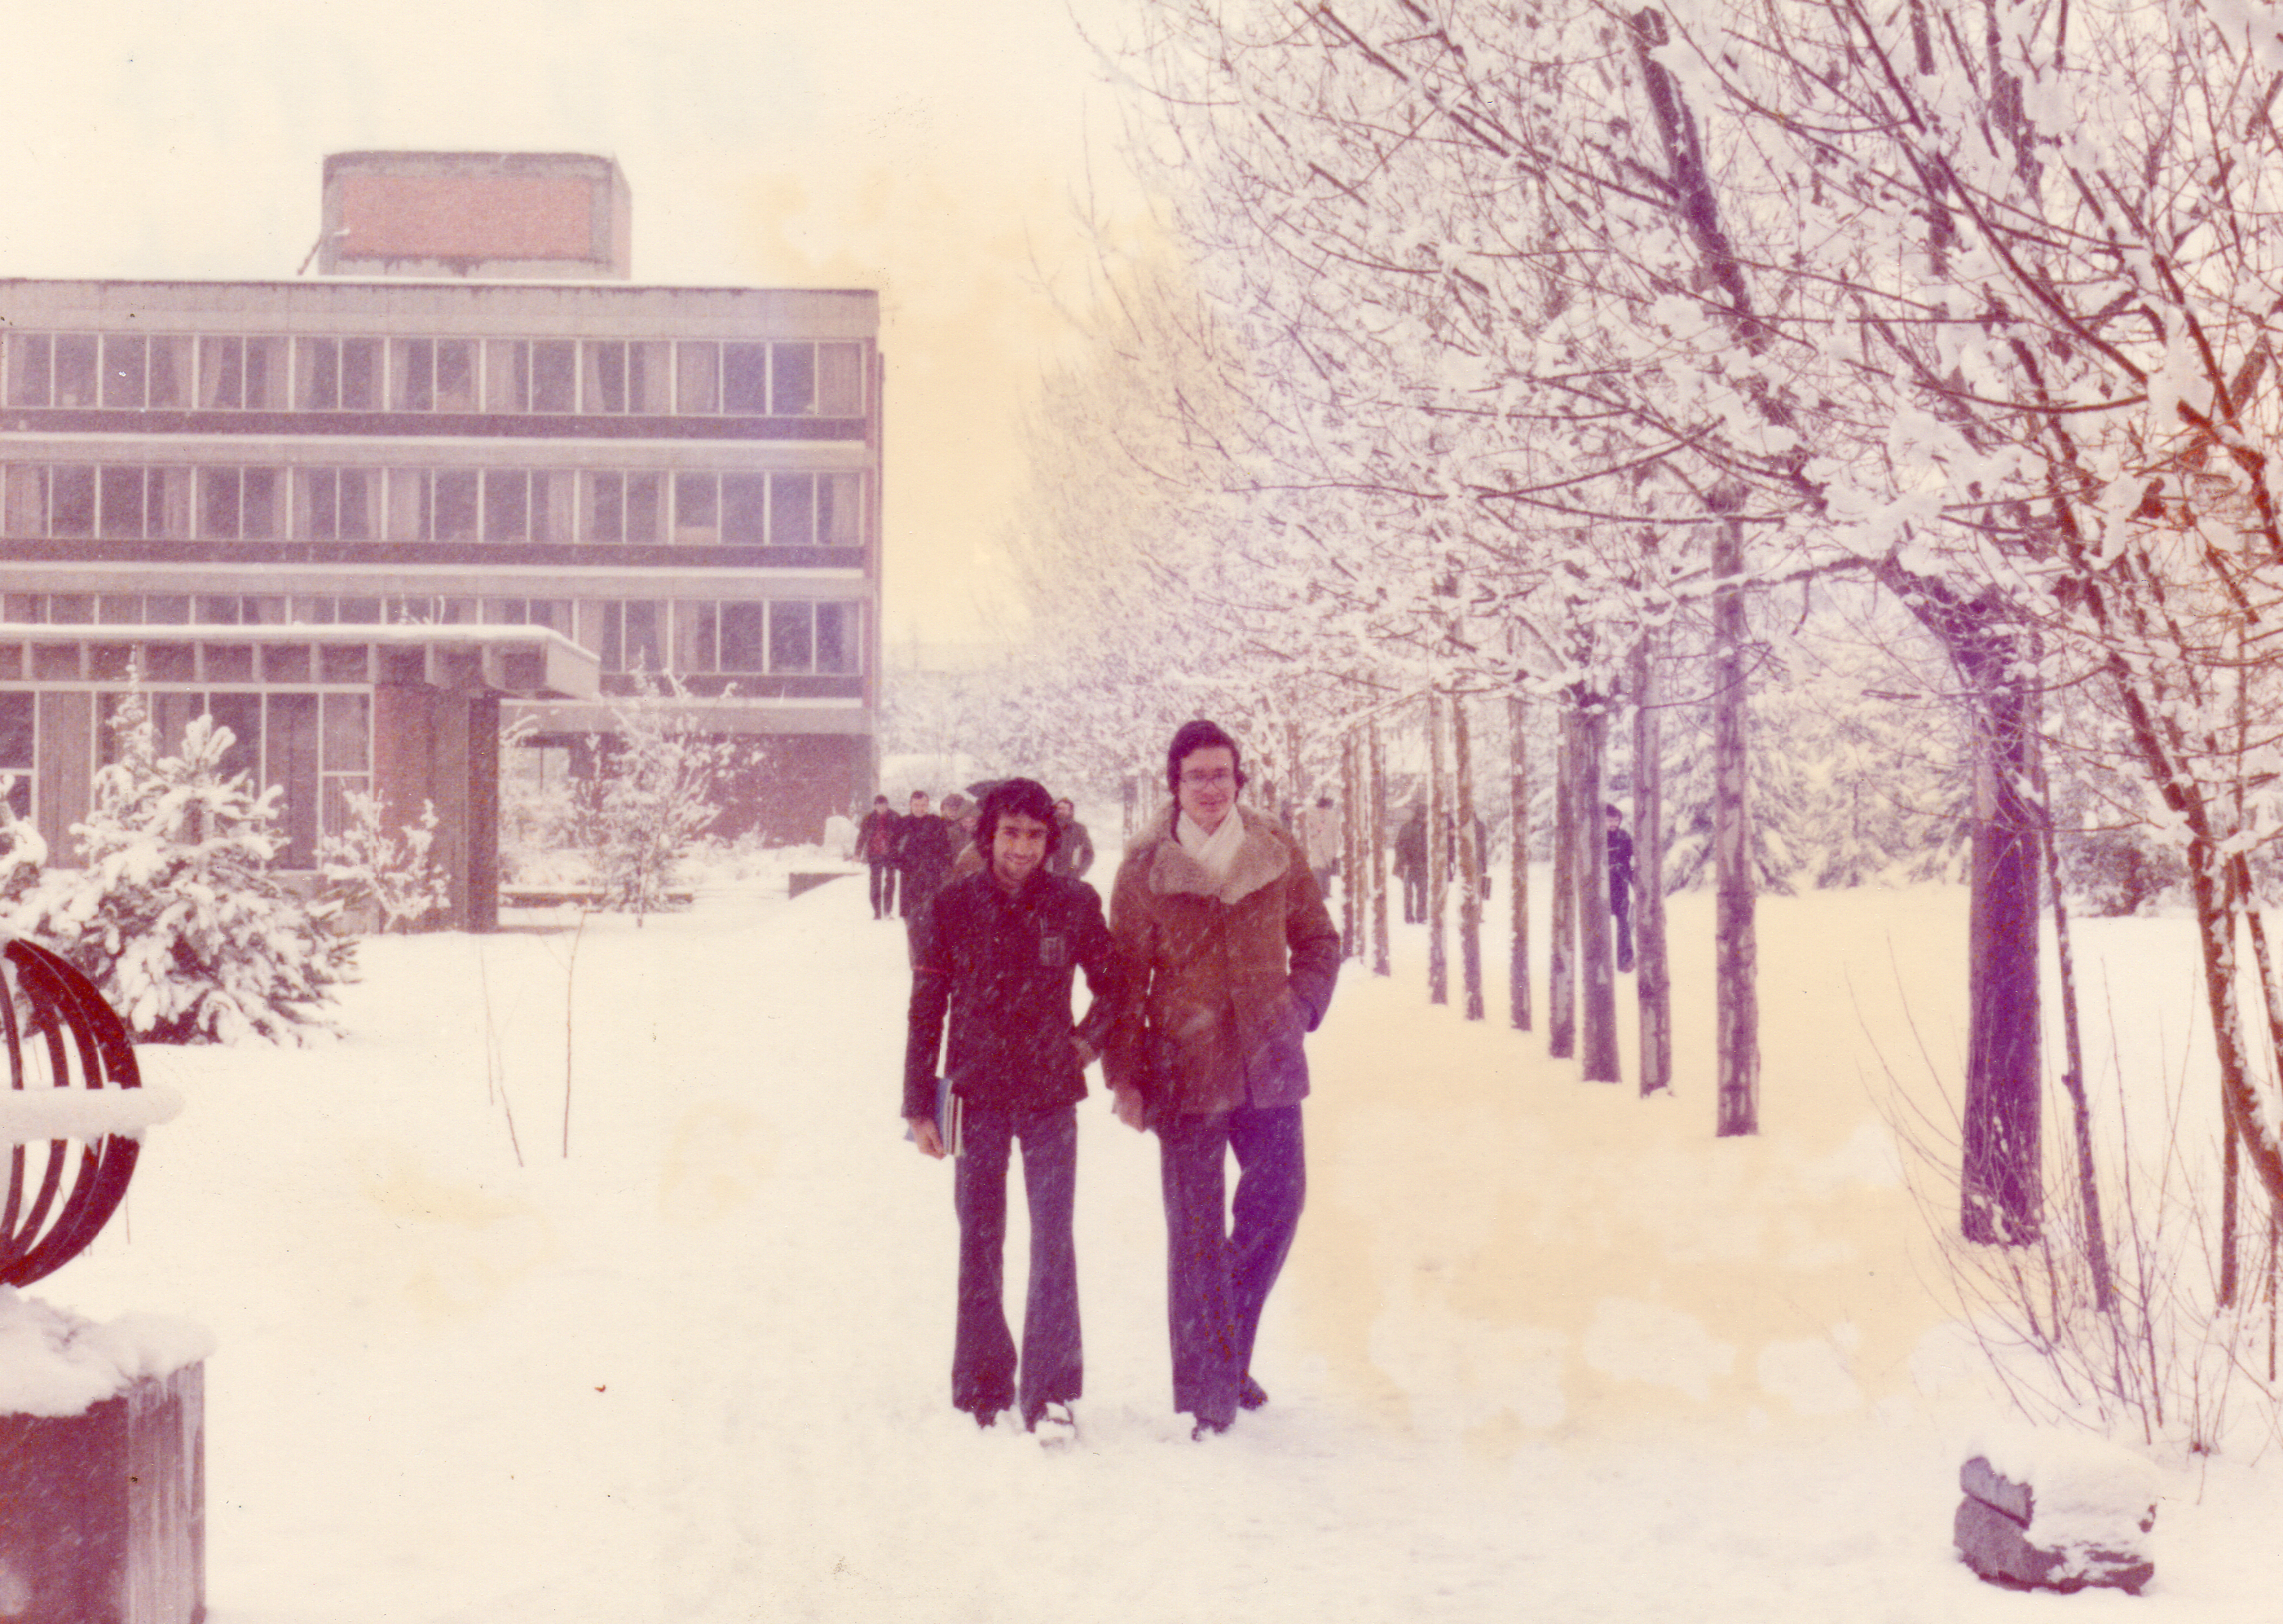 Students marching in the Alle, winter 1977